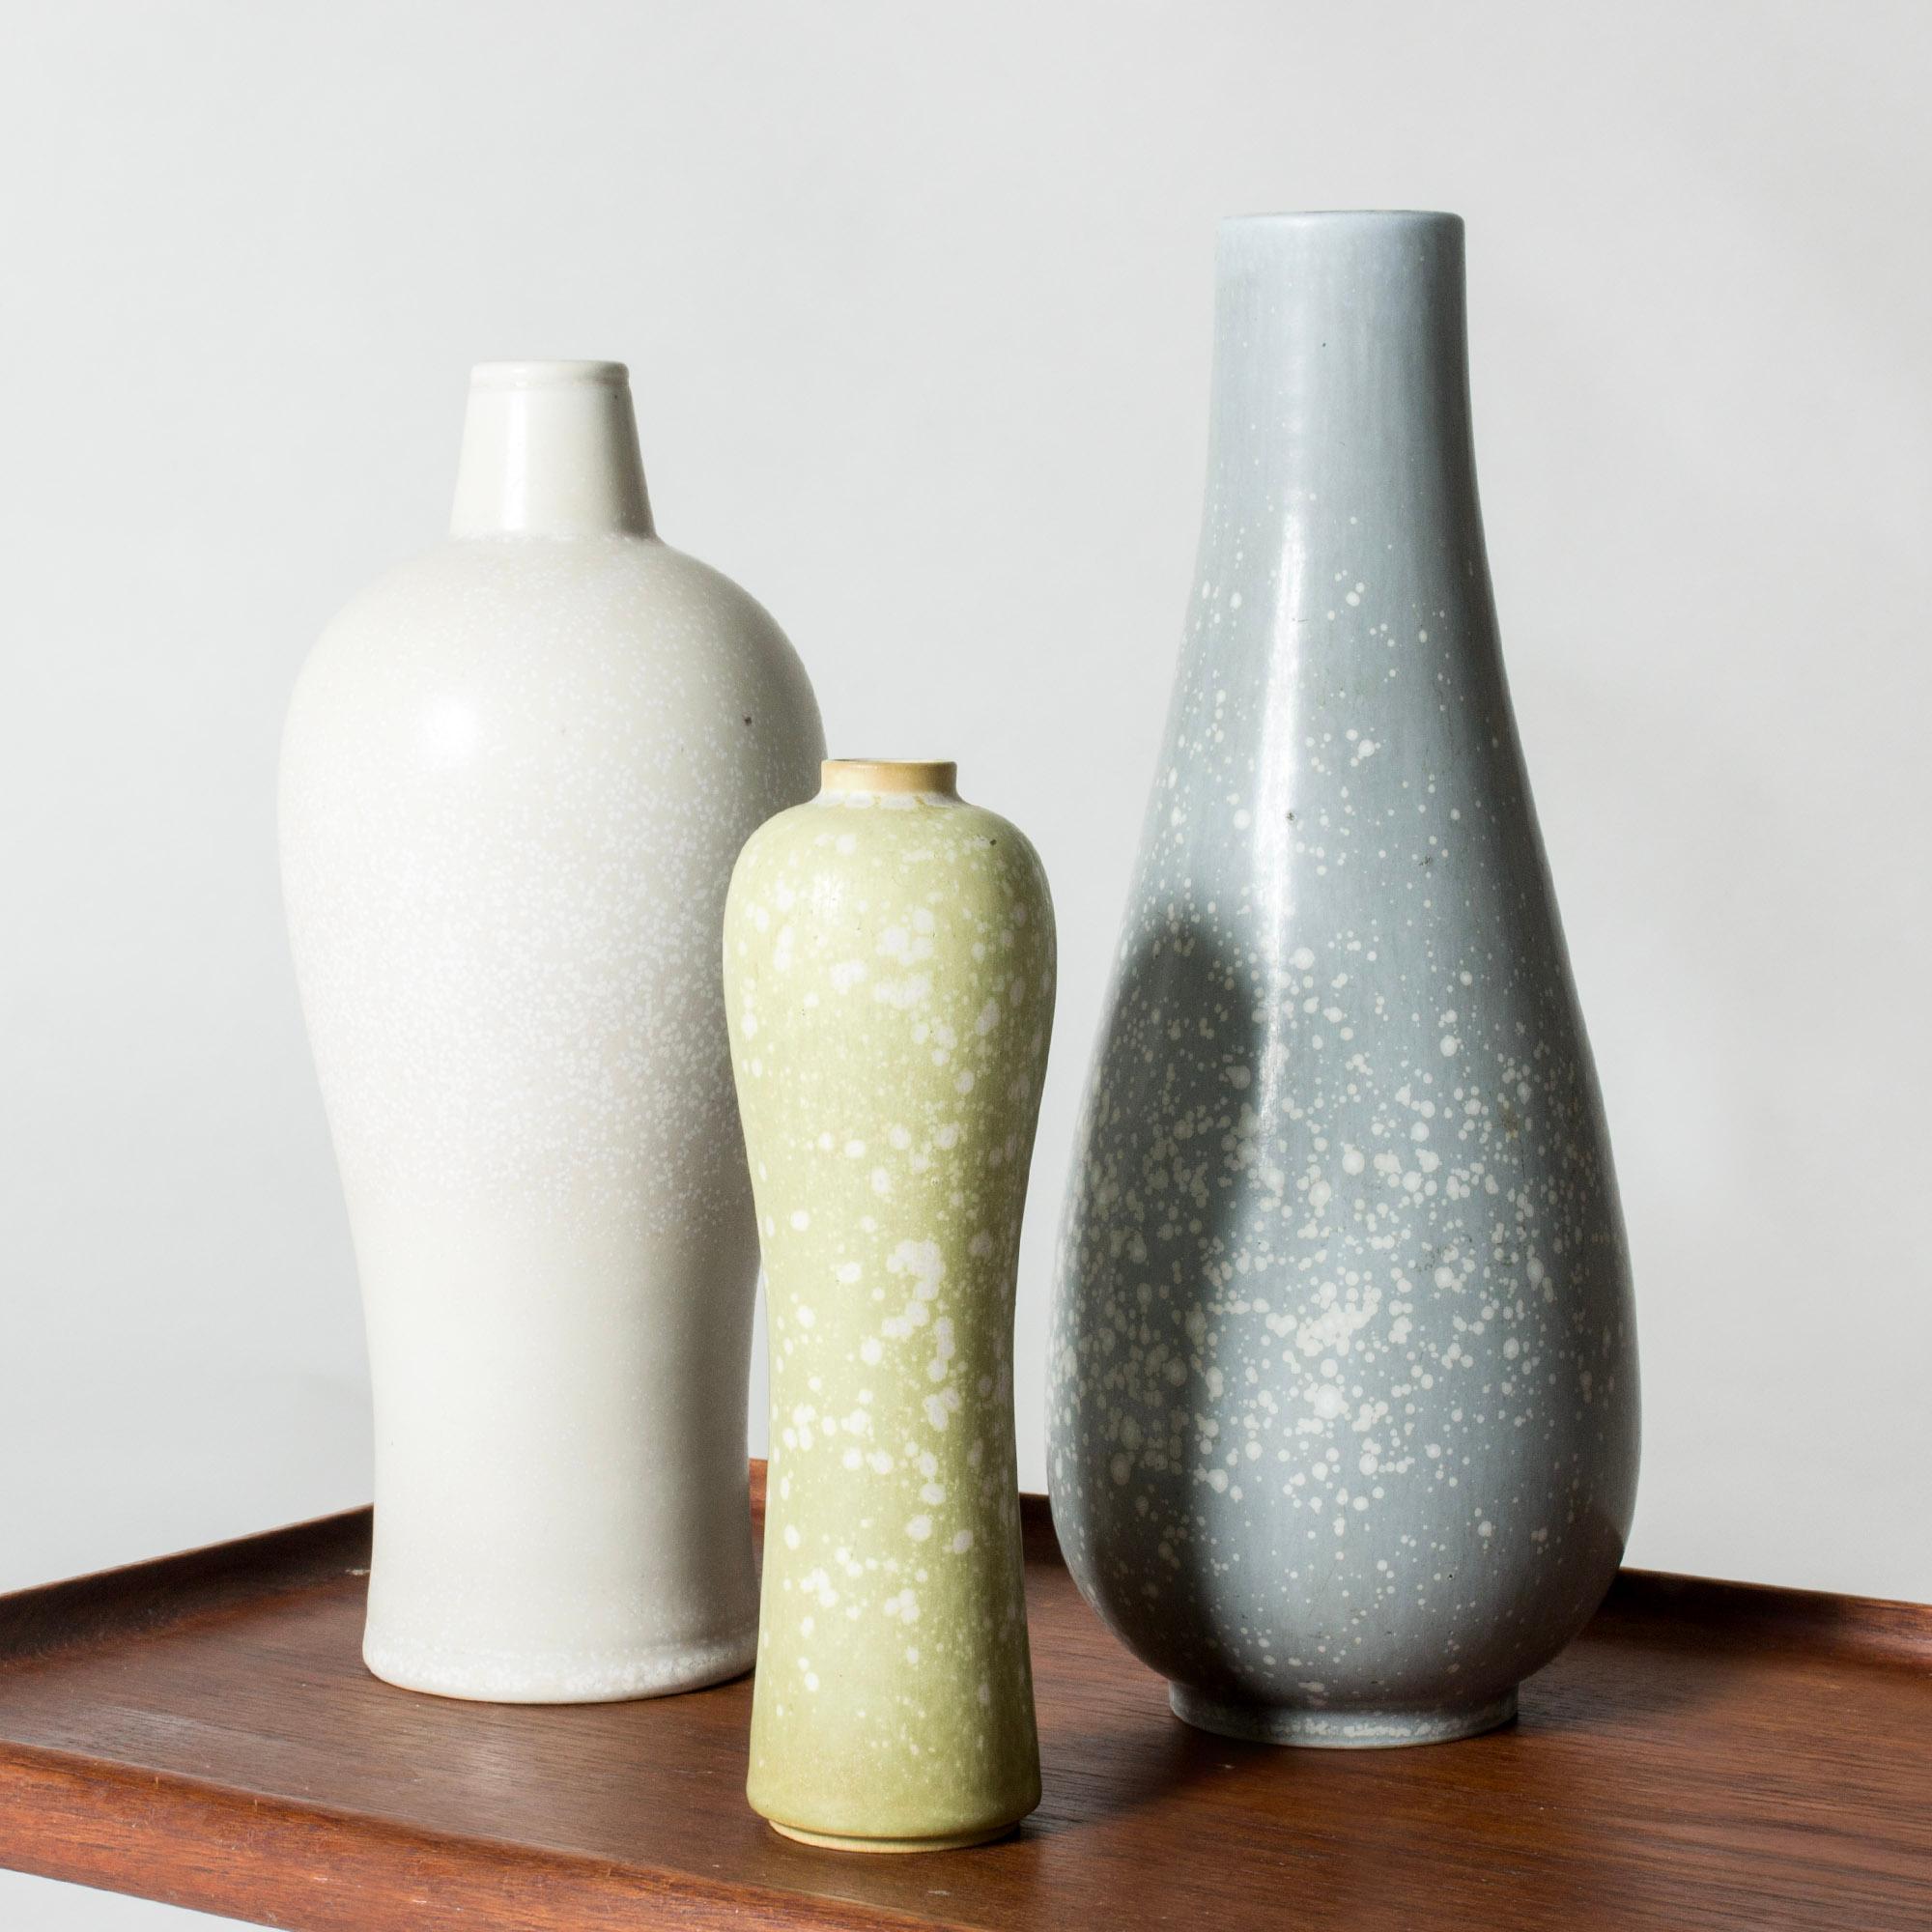 Set of three beautiful stoneware vases by Gunnar Nylund, in imaginative, curvesome forms. “Mimosa” patterned glazes in eggshell white, pale green and cloudy blue.

Height 18/25/27 cm, Diameter 5.5-10 cm.

Gunnar Nylund was one of the most